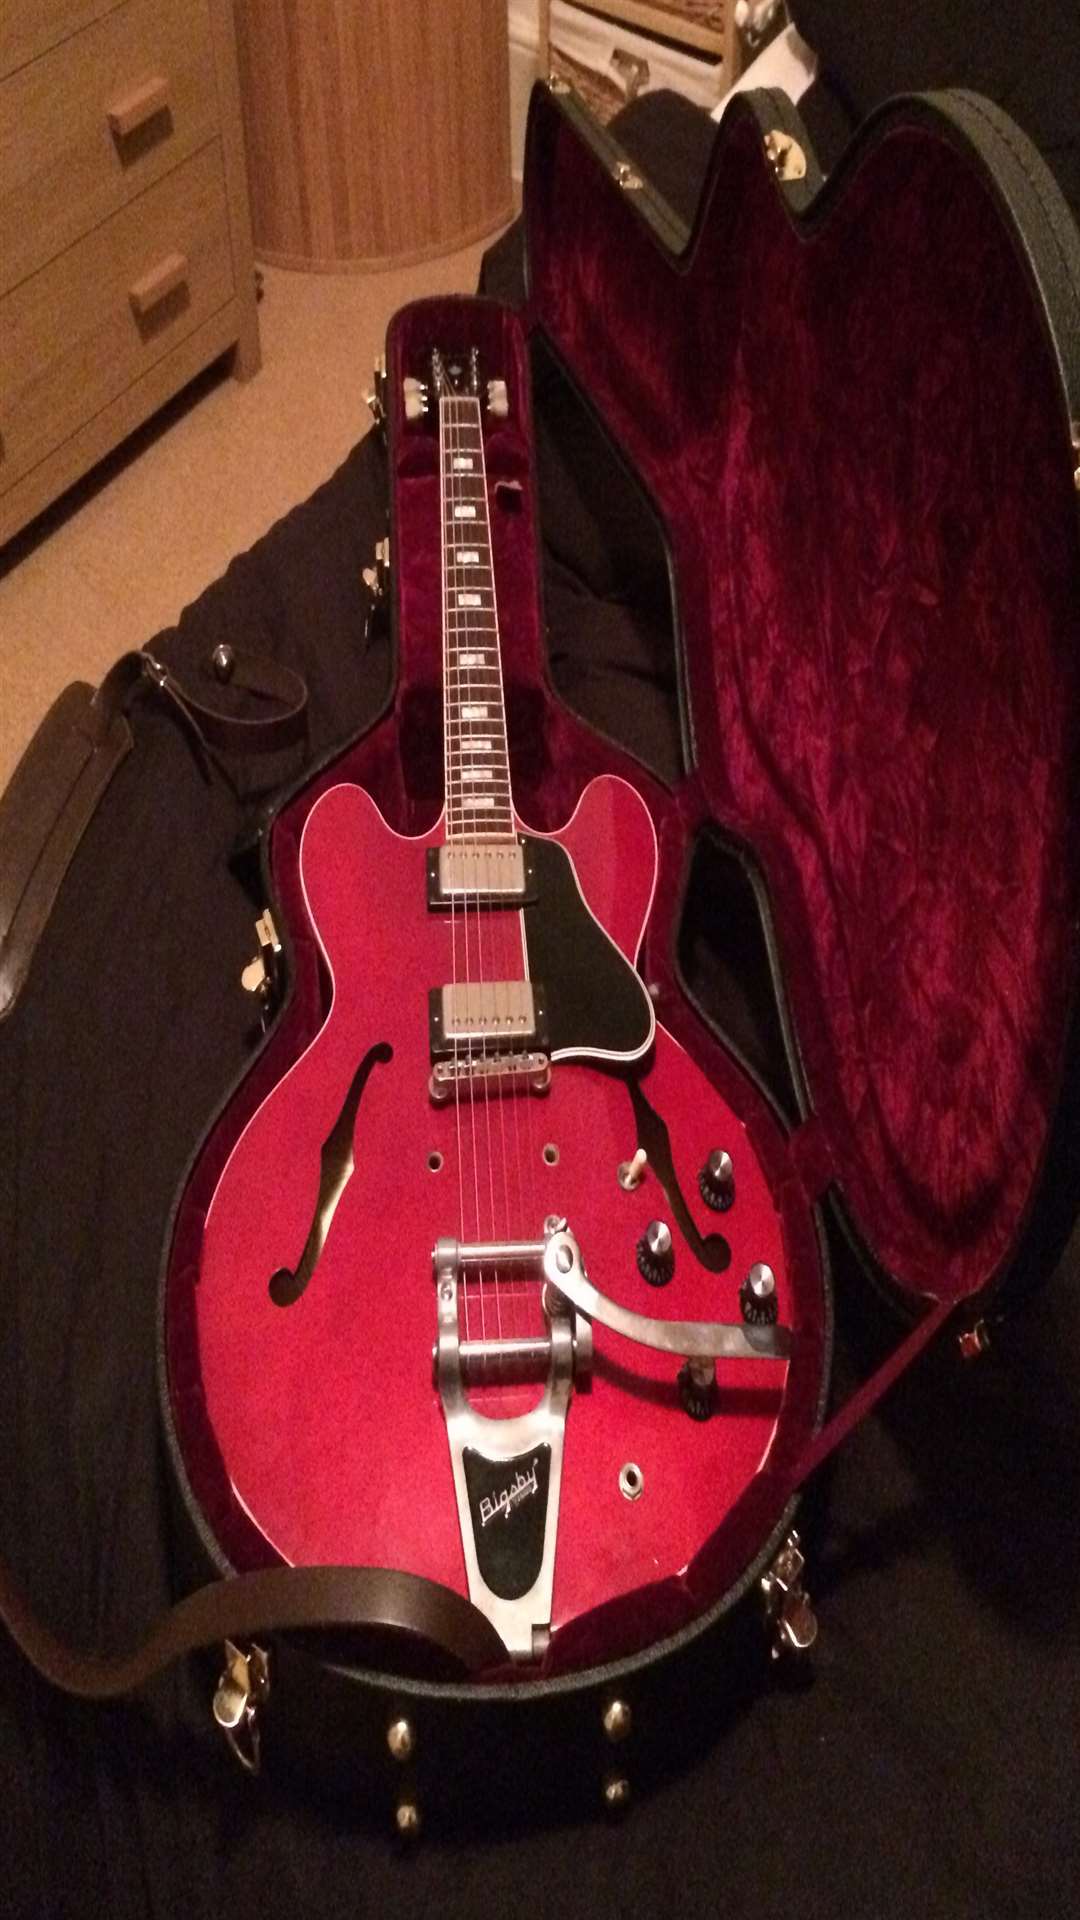 Mr Donaldson's rare Gibson ES 335 which may have been stolen